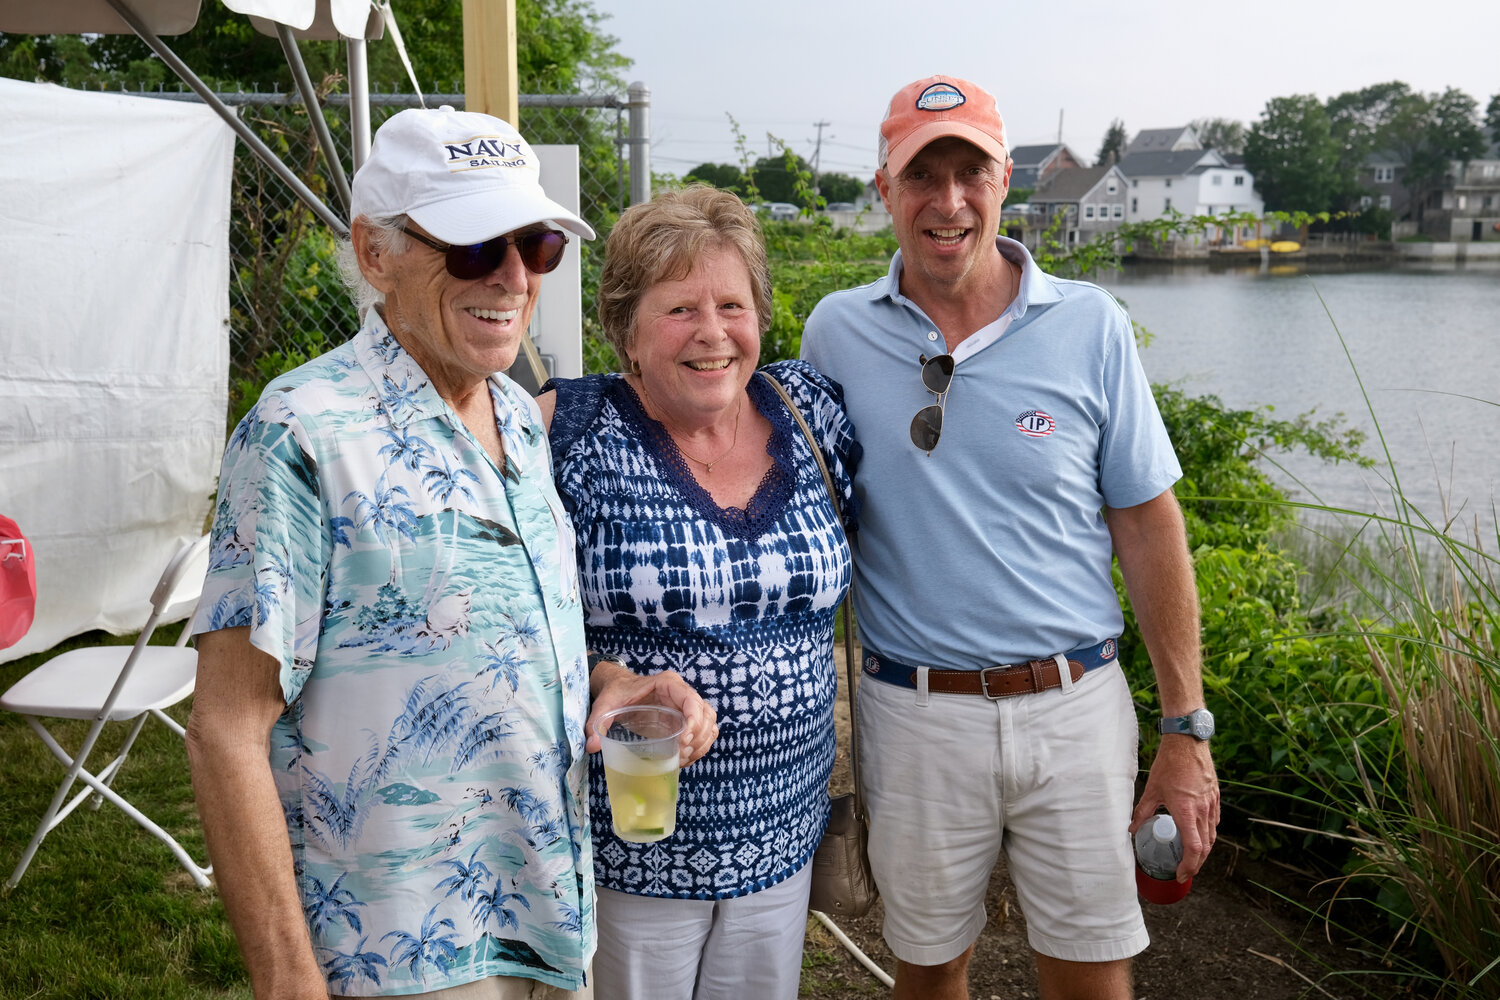 Jimmy Buffett (left) poses for a photo with Sharon MacFarlane and her son, Mike, the owner of Sunset Cove where Buffett made a surprise appearance on Sunday.